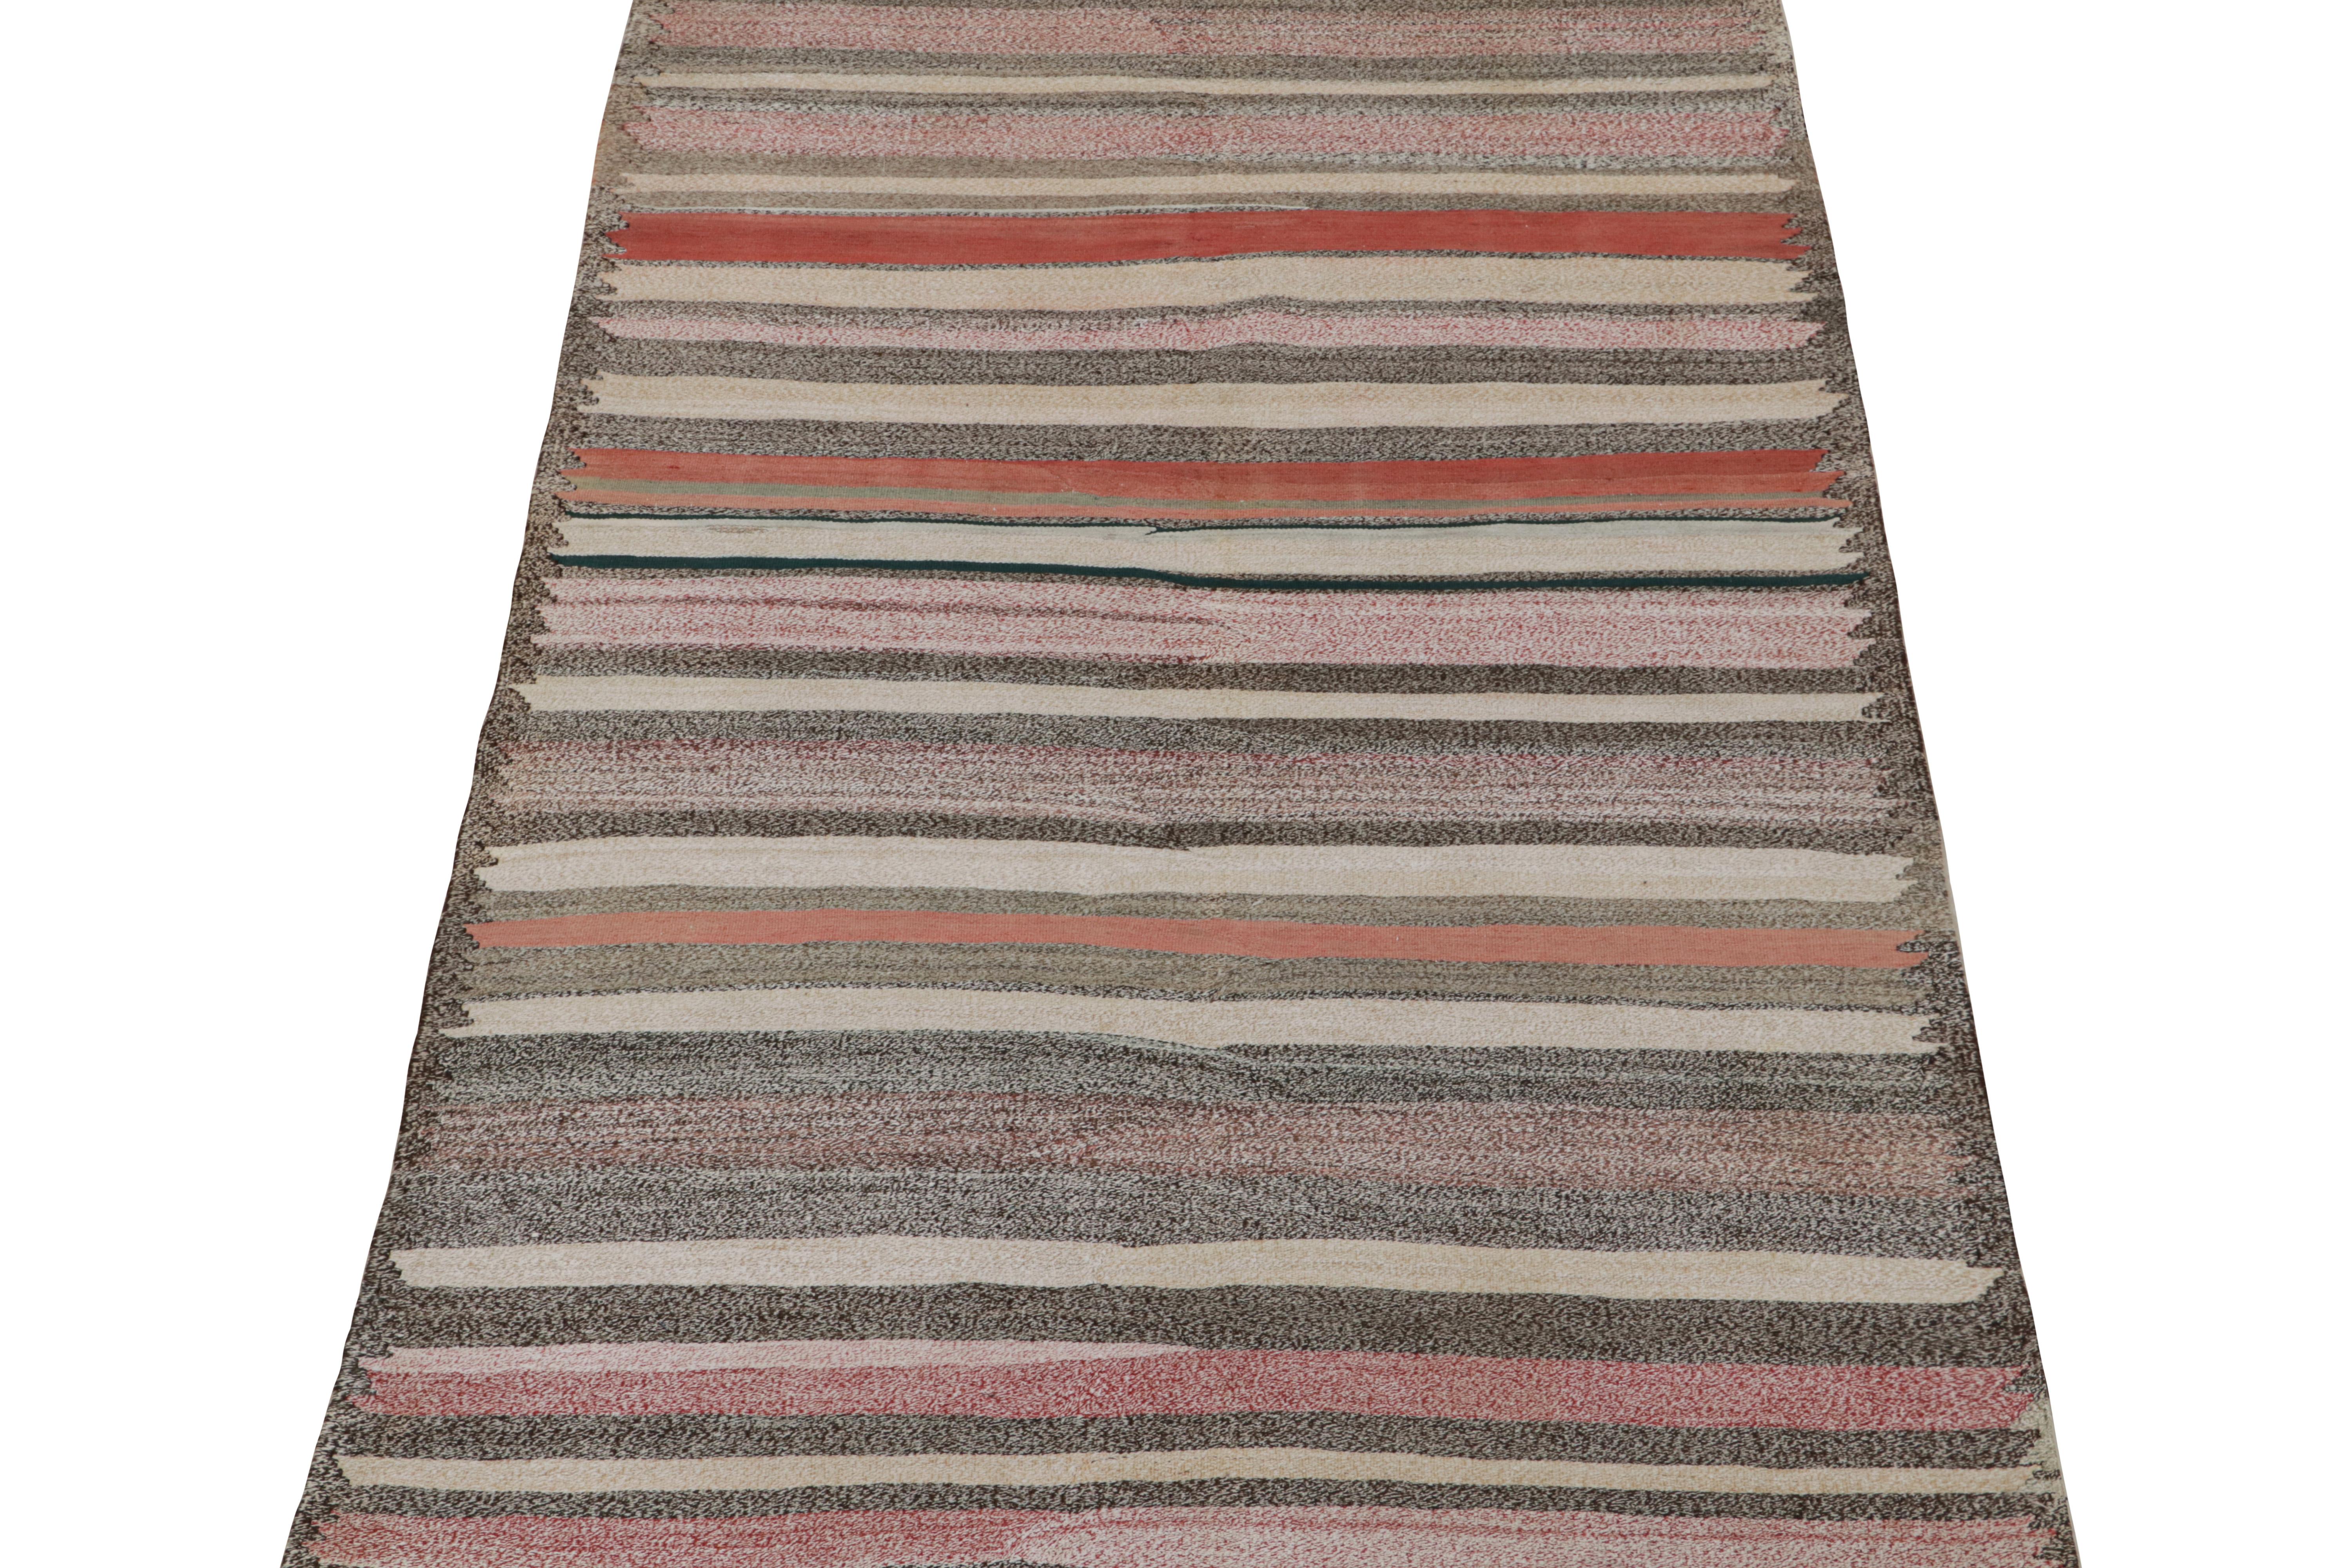 Vintage Shahsavan Persian Kilim in Gray and Red Stripes In Good Condition For Sale In Long Island City, NY